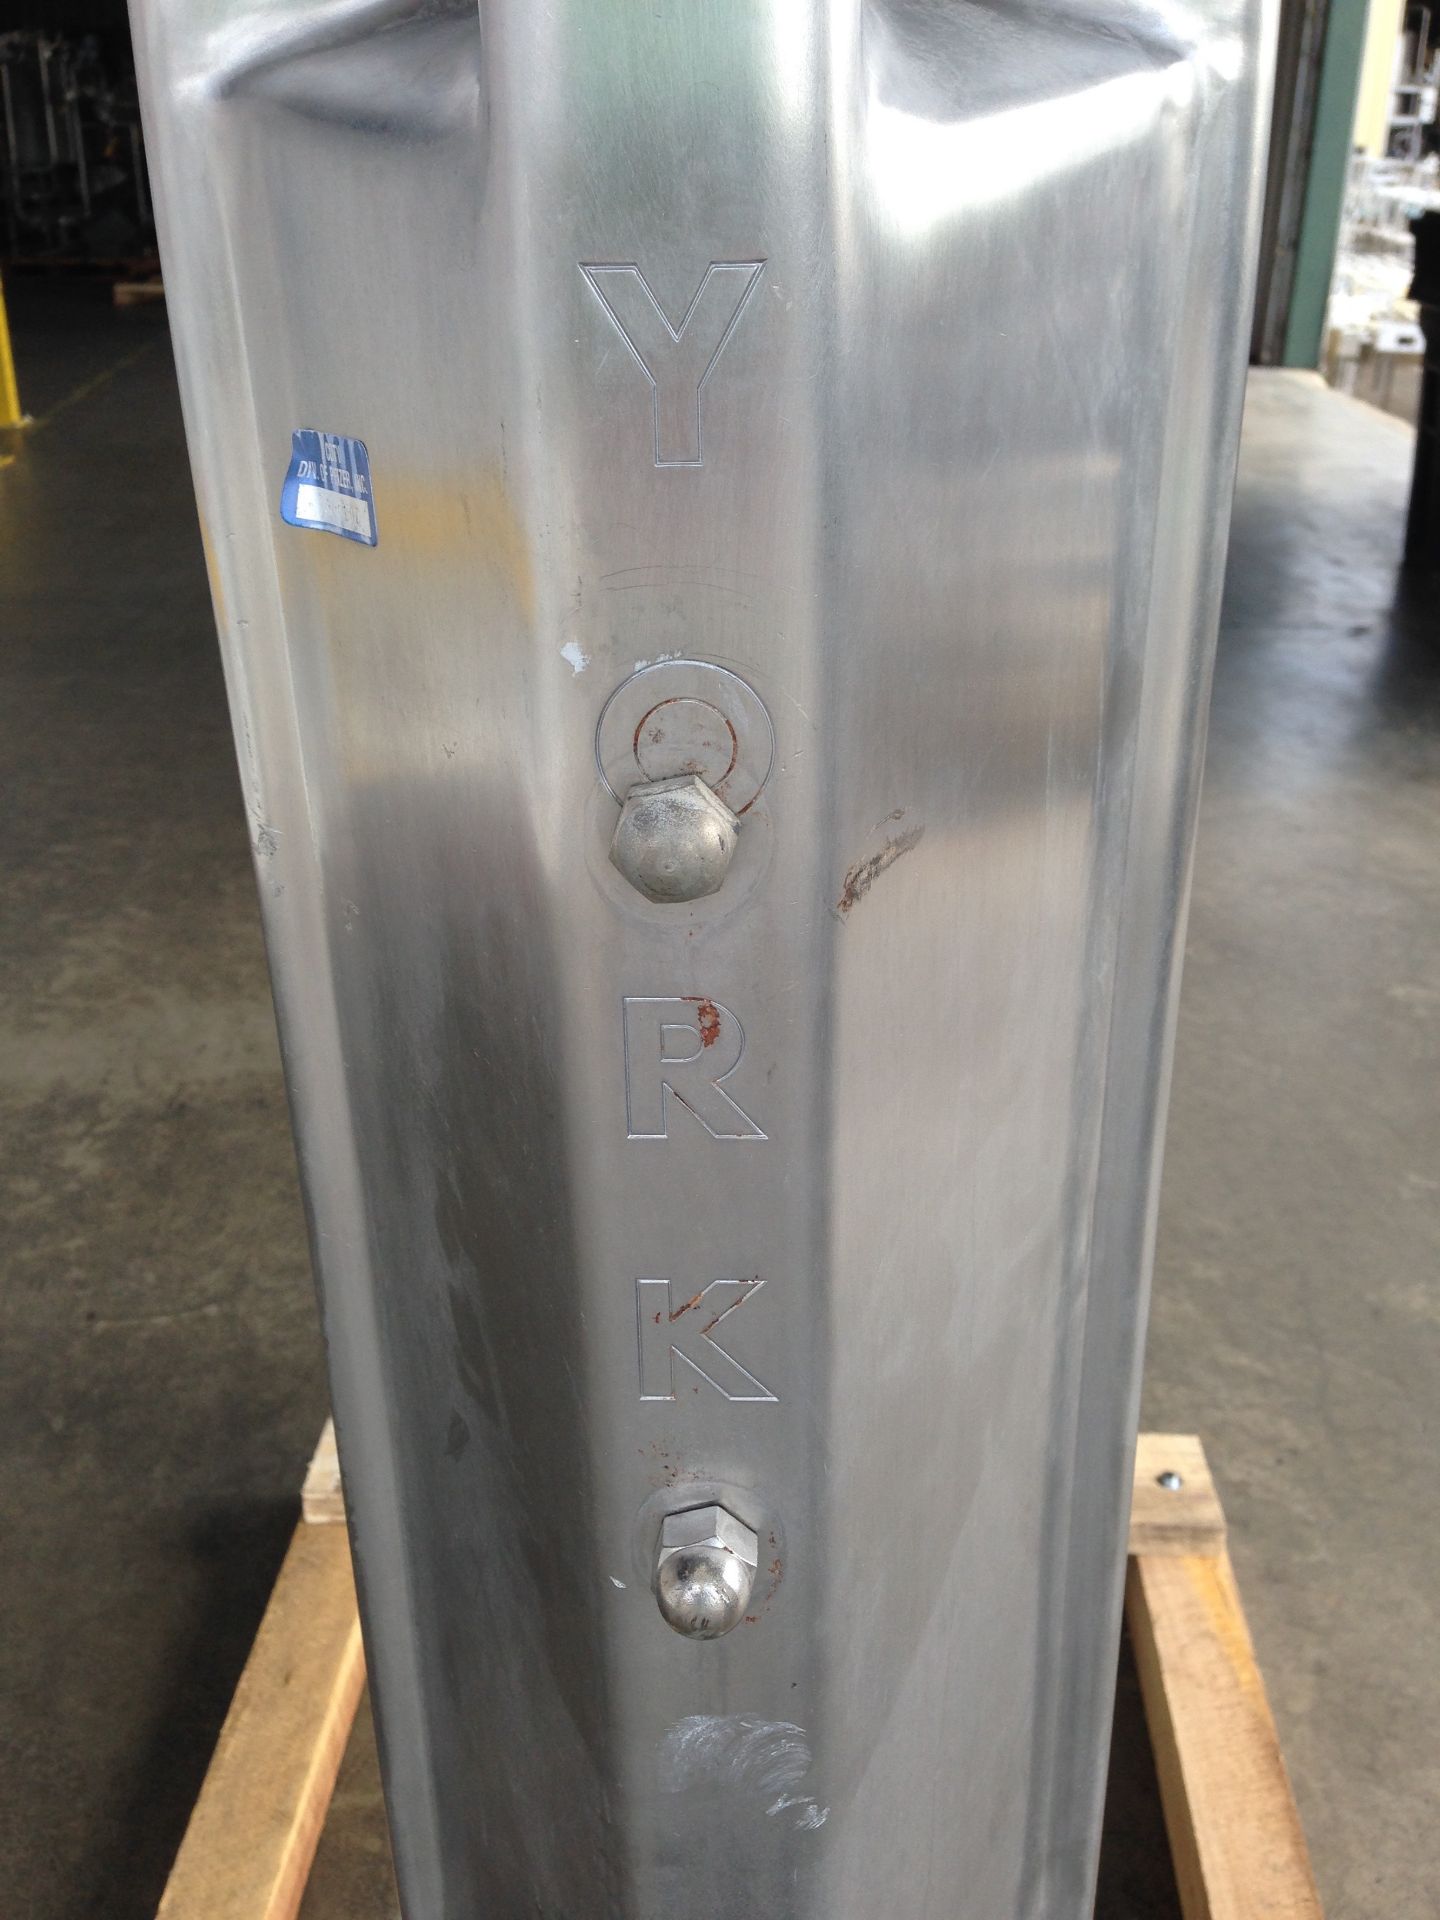 York Plate and Frame Heat Exchanger Serial: 9503402 Patent Number: 1992097Stainless Steel Plates, - Image 4 of 5